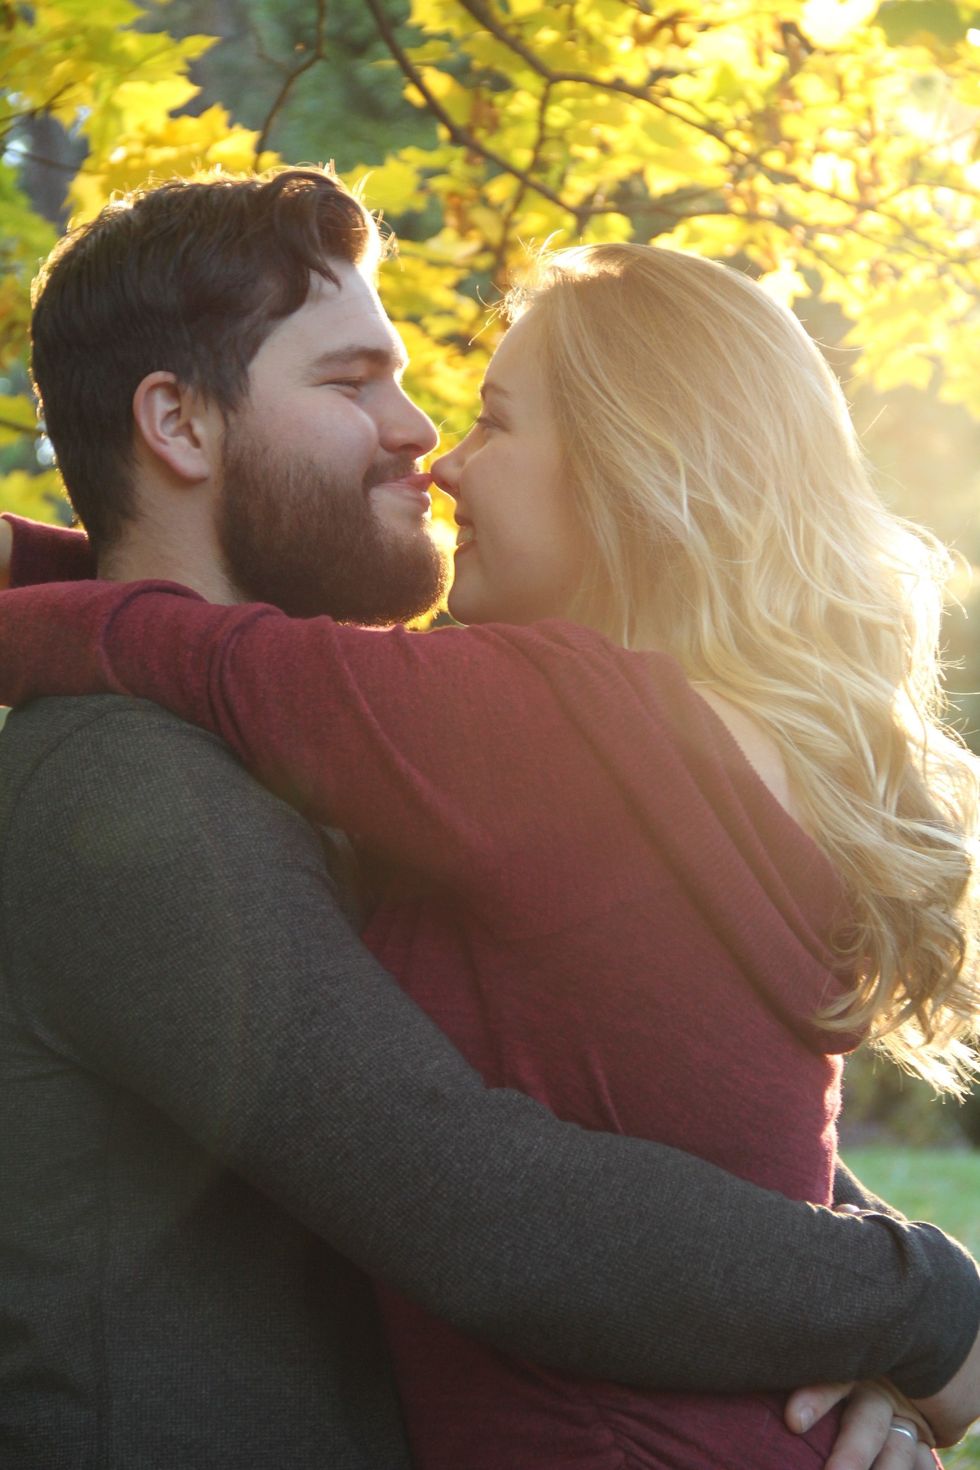 10 Of The Biggest 'No-No's' Of An Engagement Photoshoot As Told By A Bride Who Has Gone Through Them